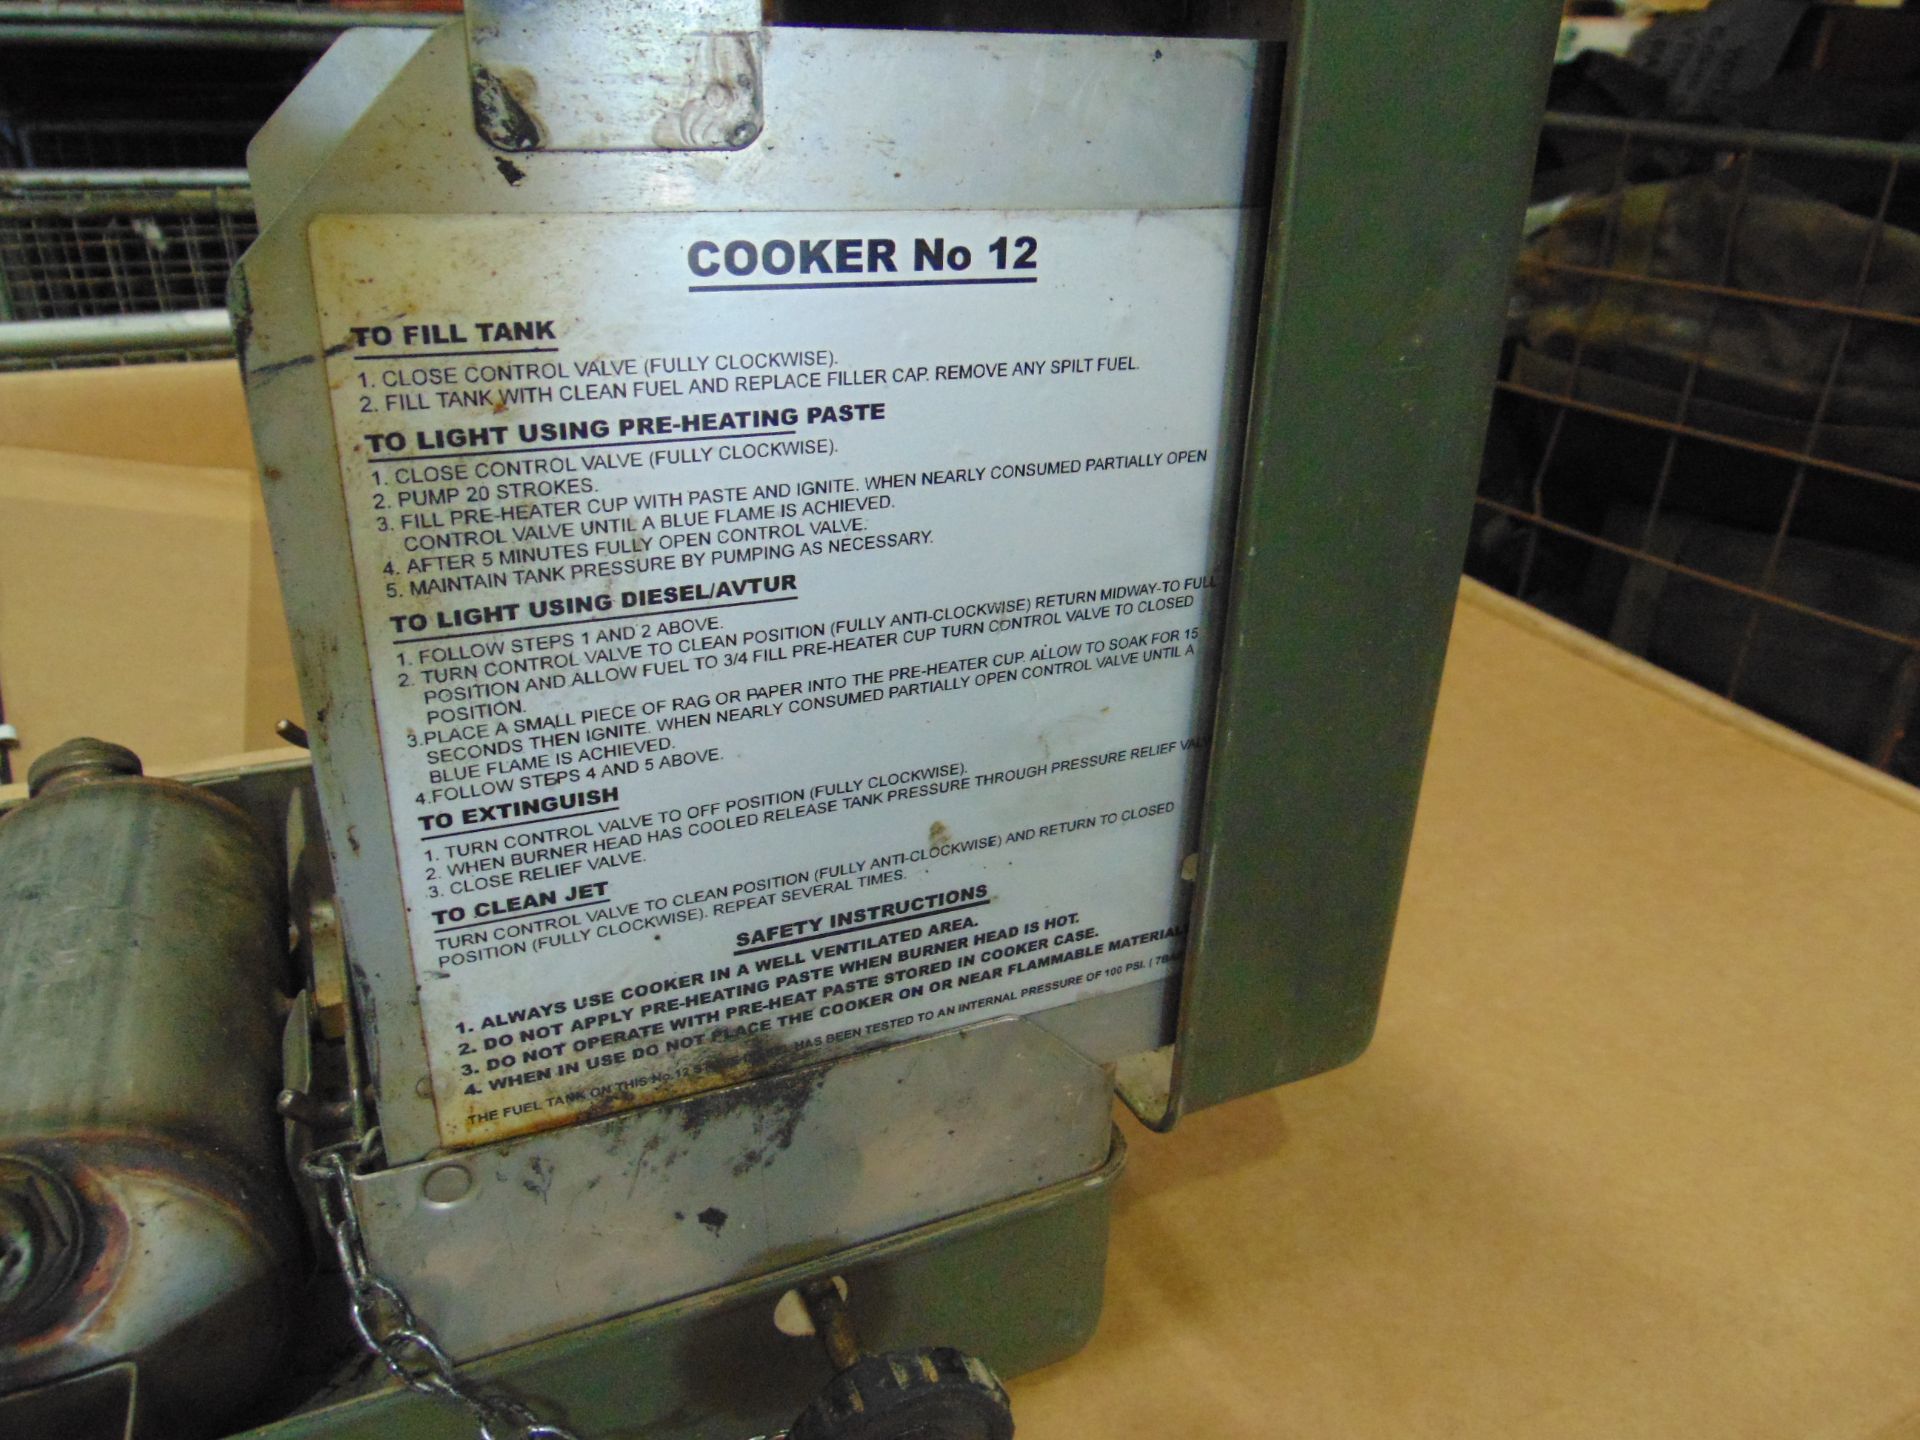 COOKSET NO. 12 DIESEL STOVE - Image 3 of 8